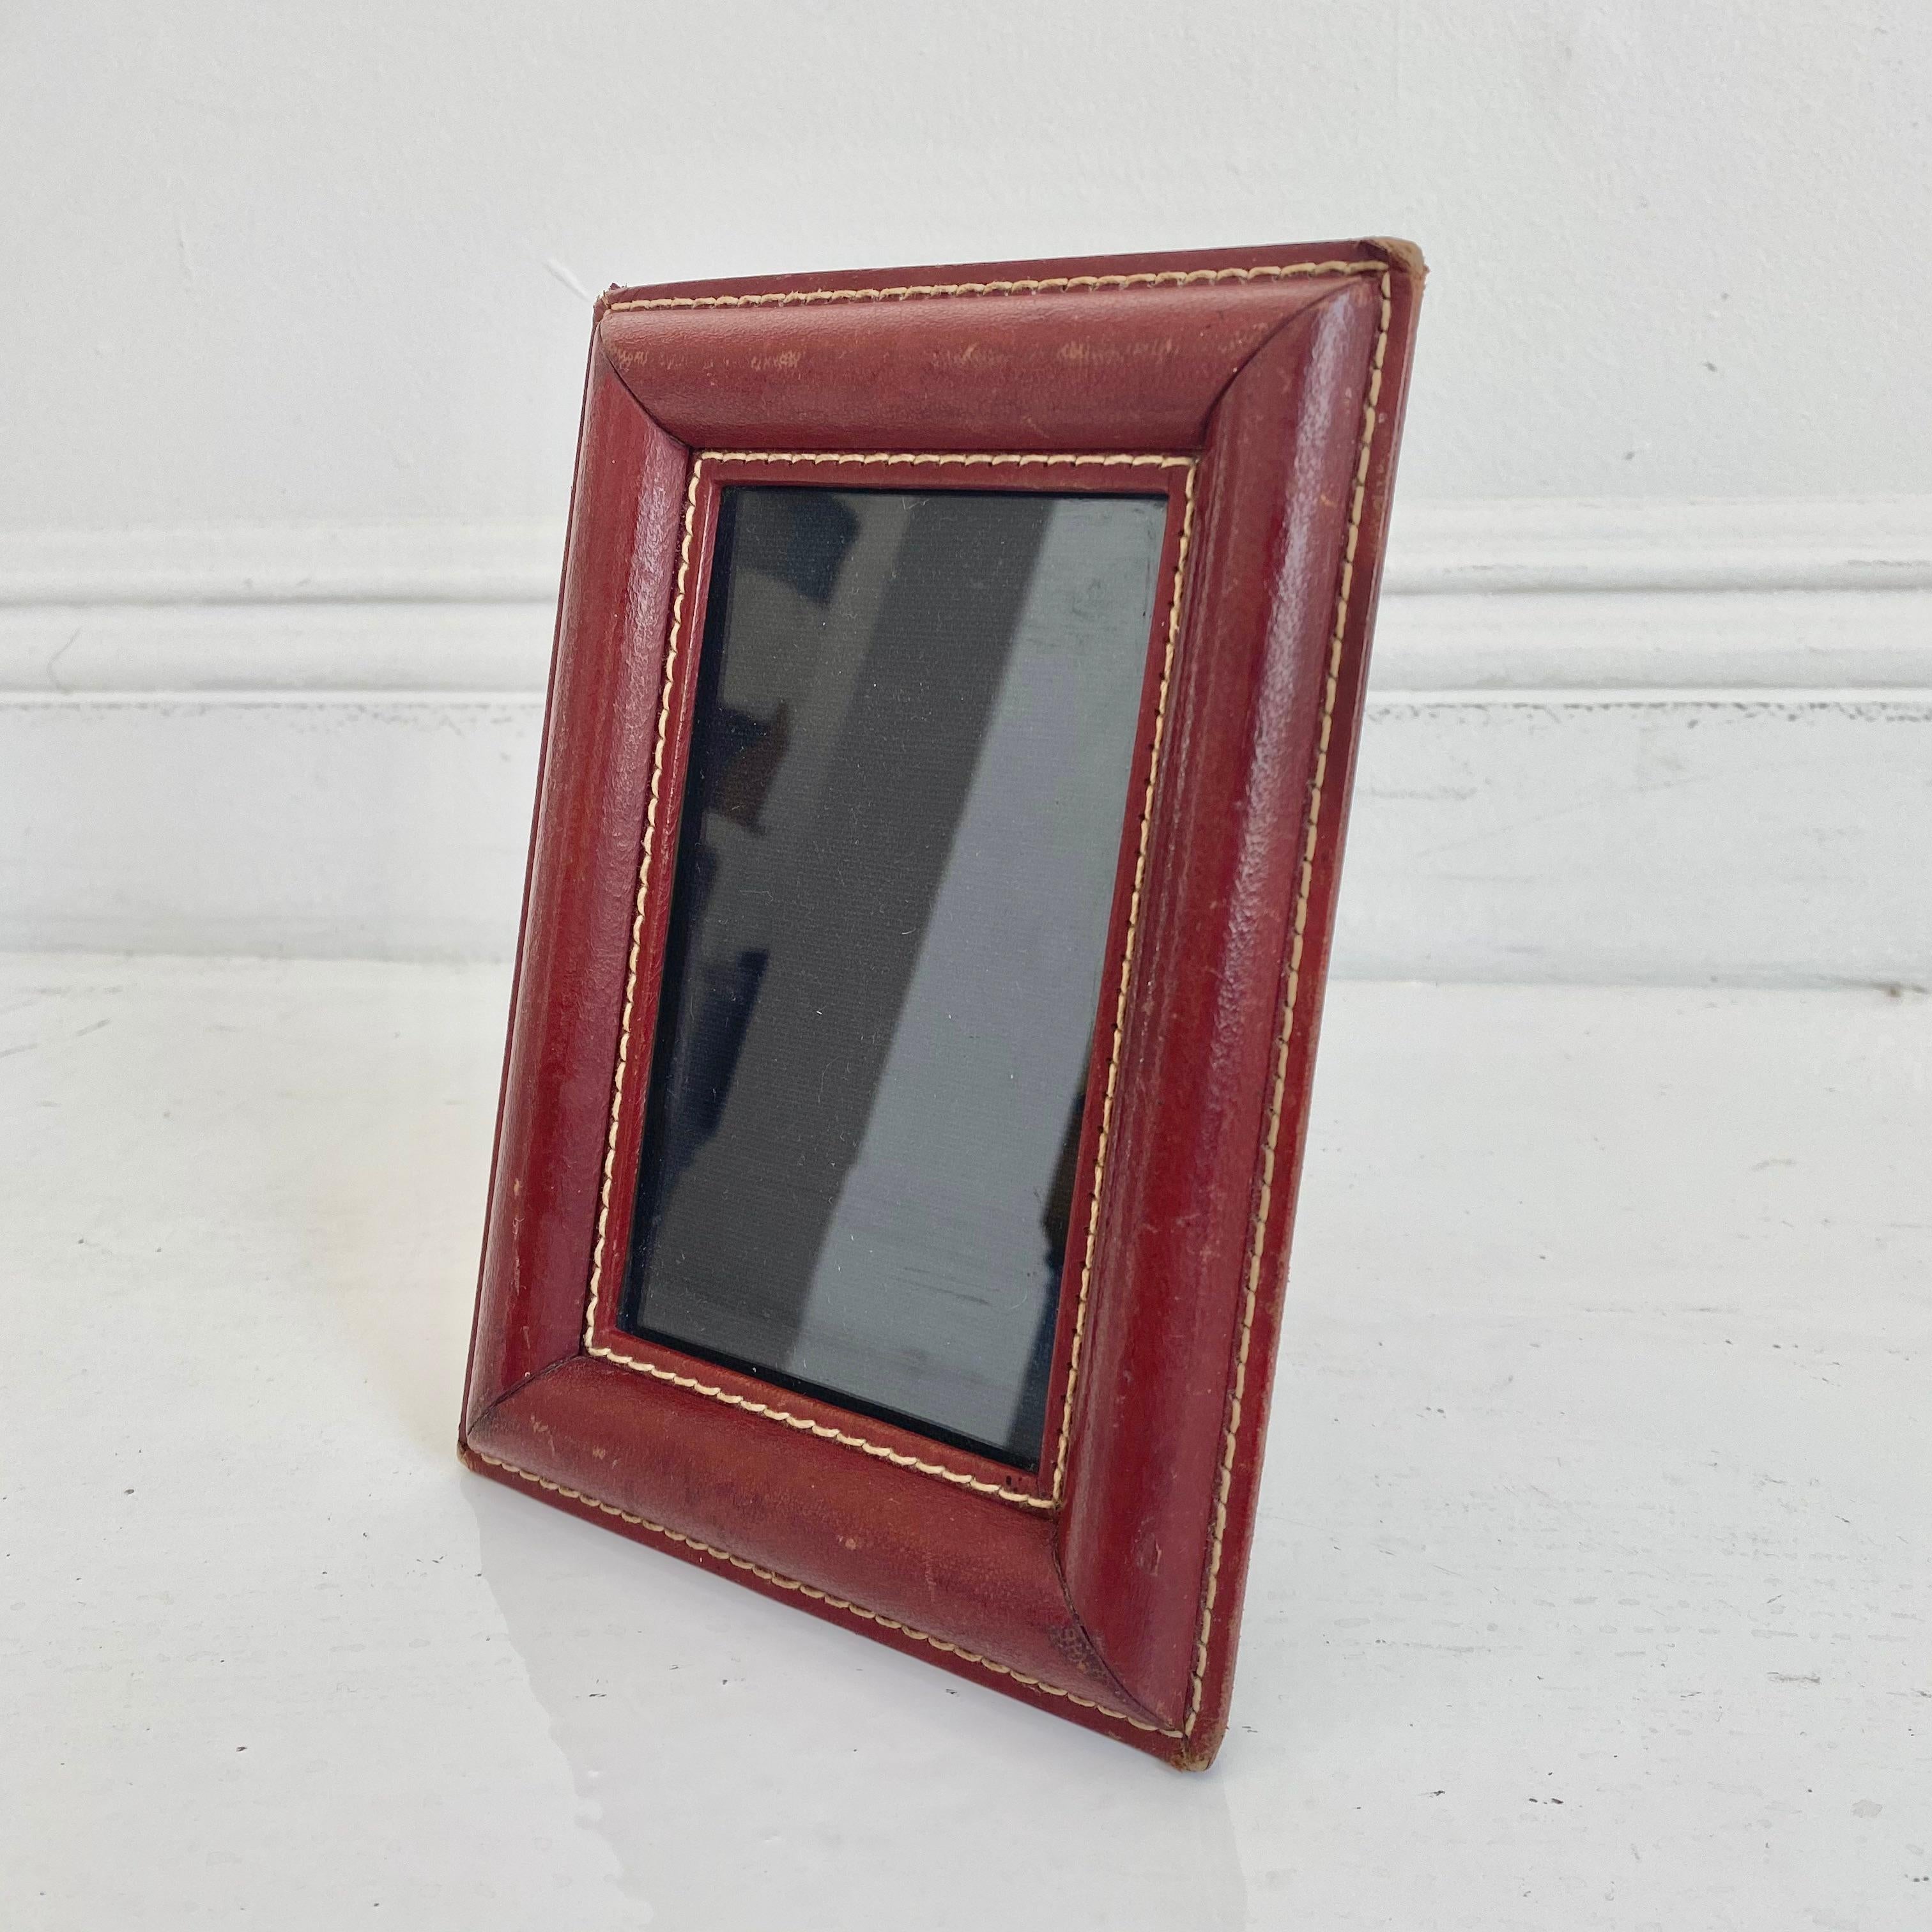 Handsome French leather picture frame by Jacques Adnet. Red leather with signature Adnet contrast stitching. Very good vintage condition. Great patina and age to leather.